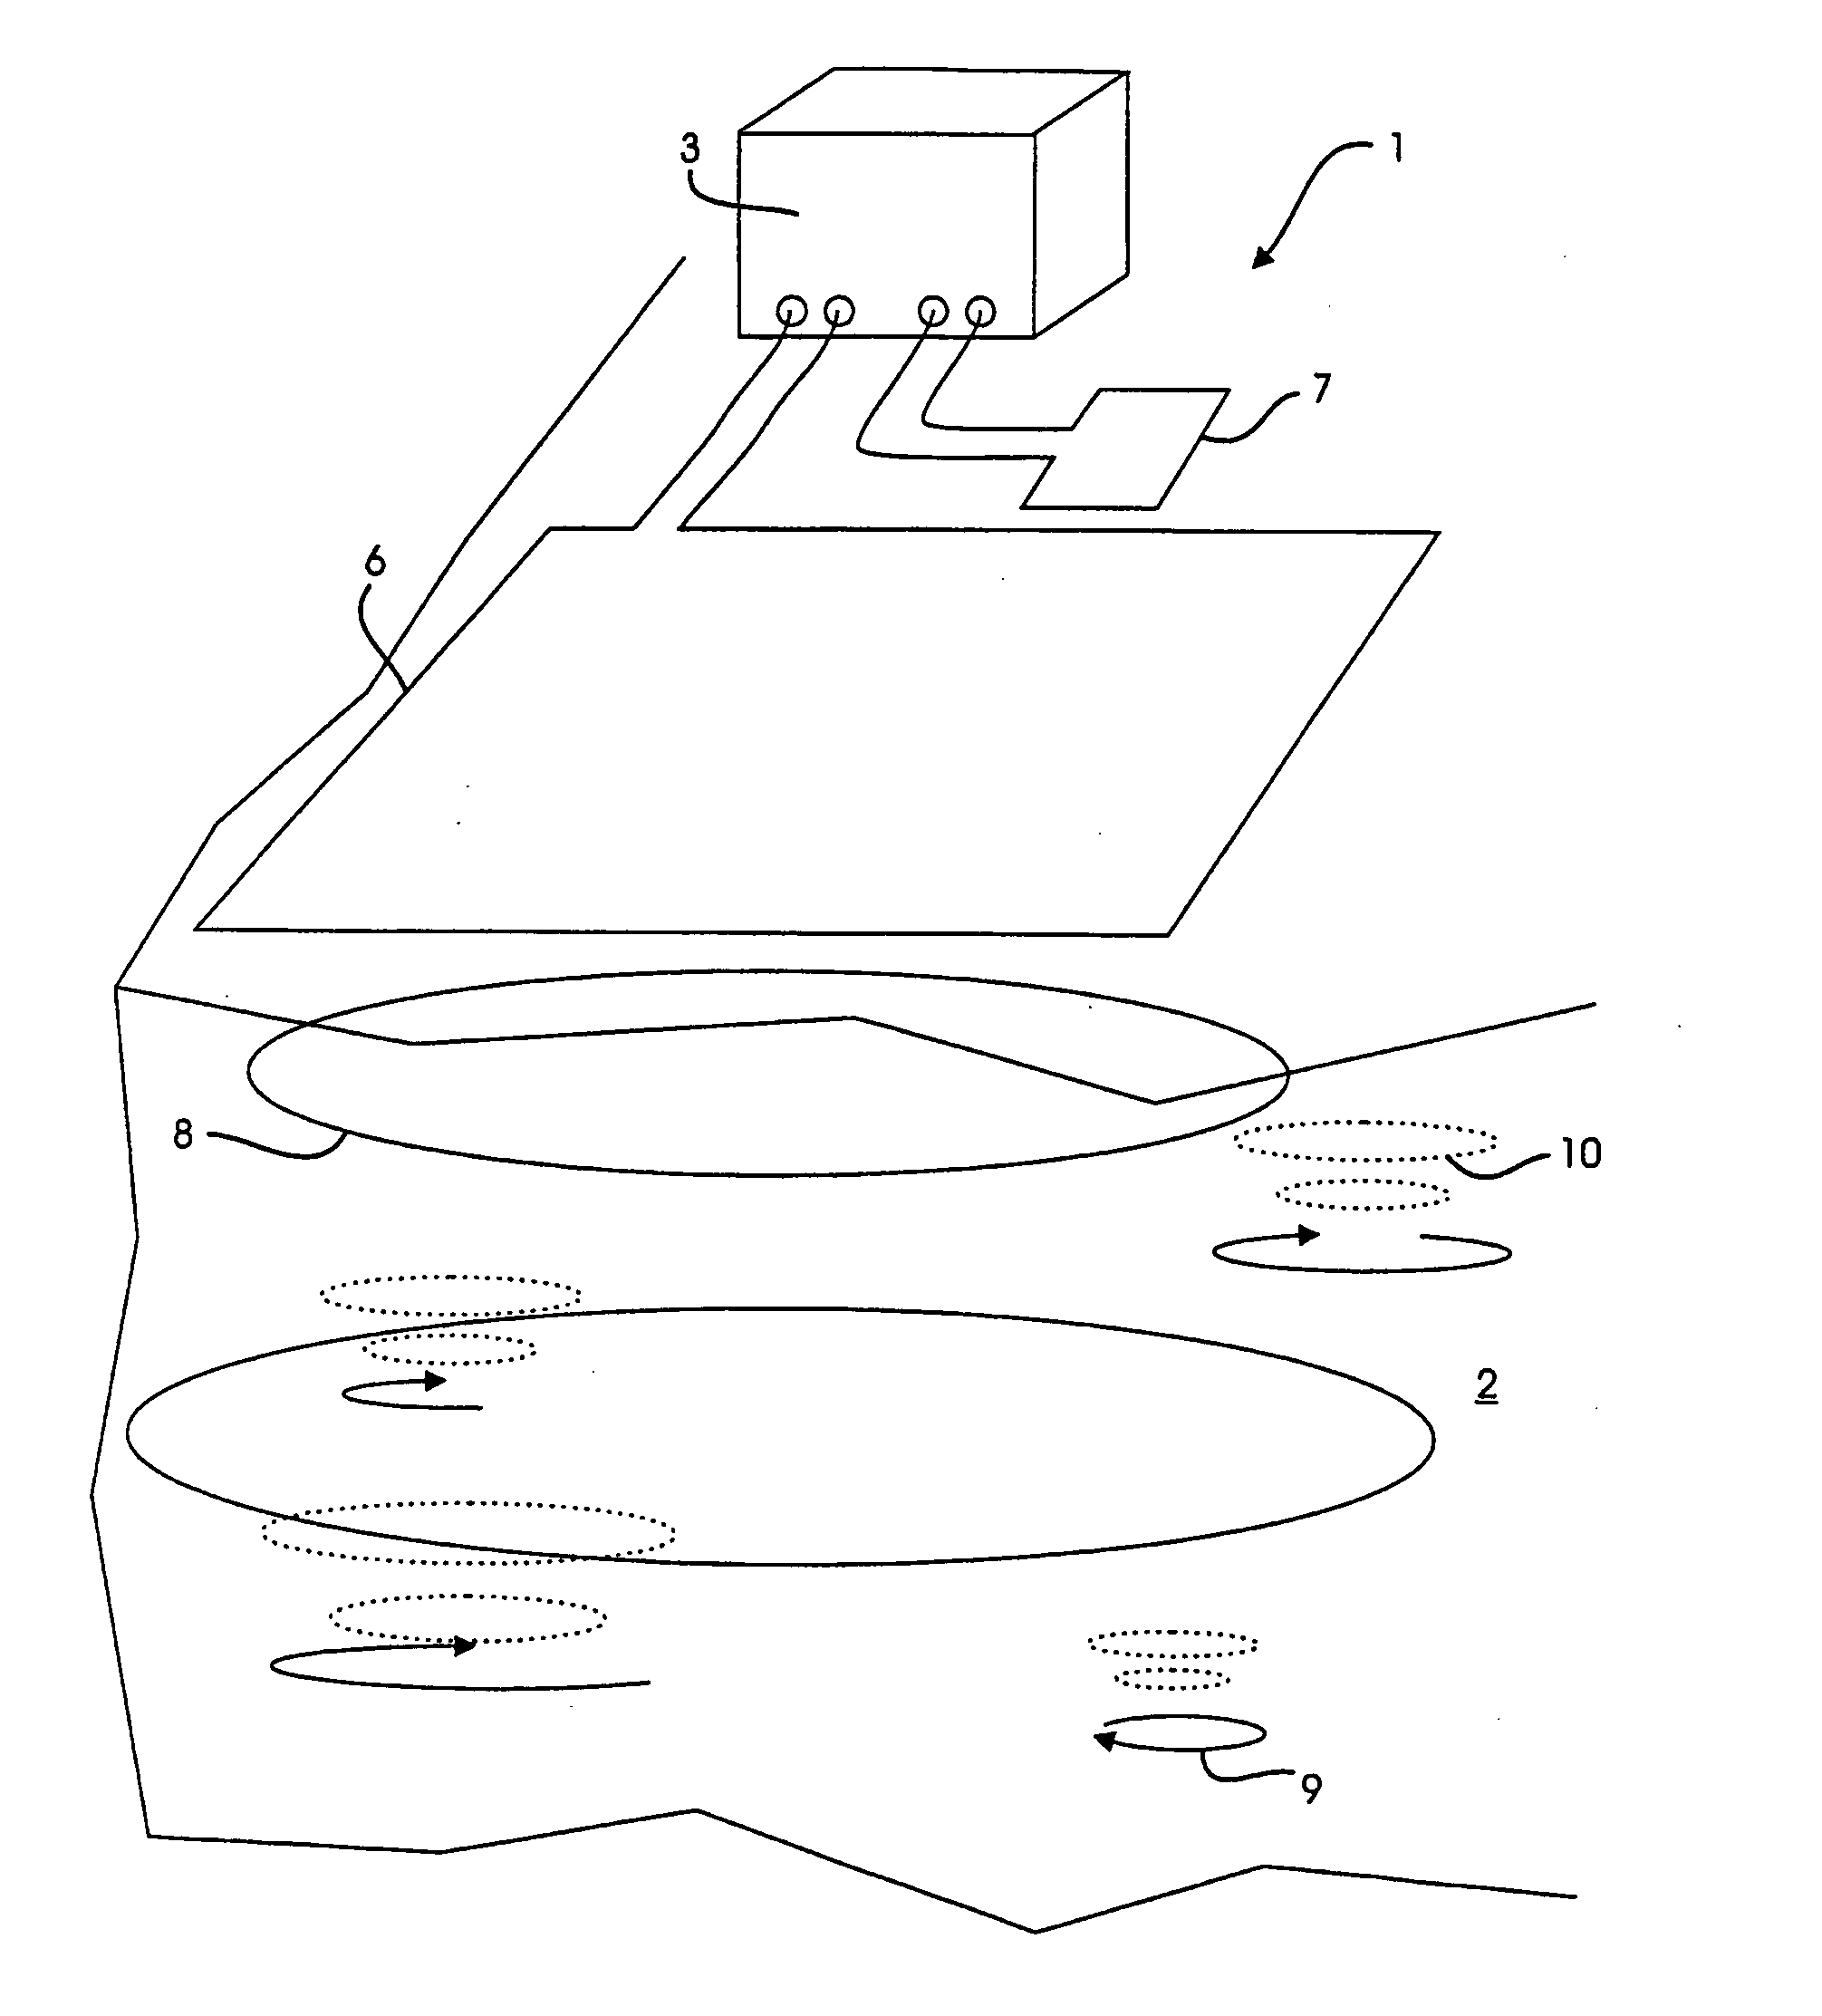 Measuring equipment and method for mapping the geology in an underground formation